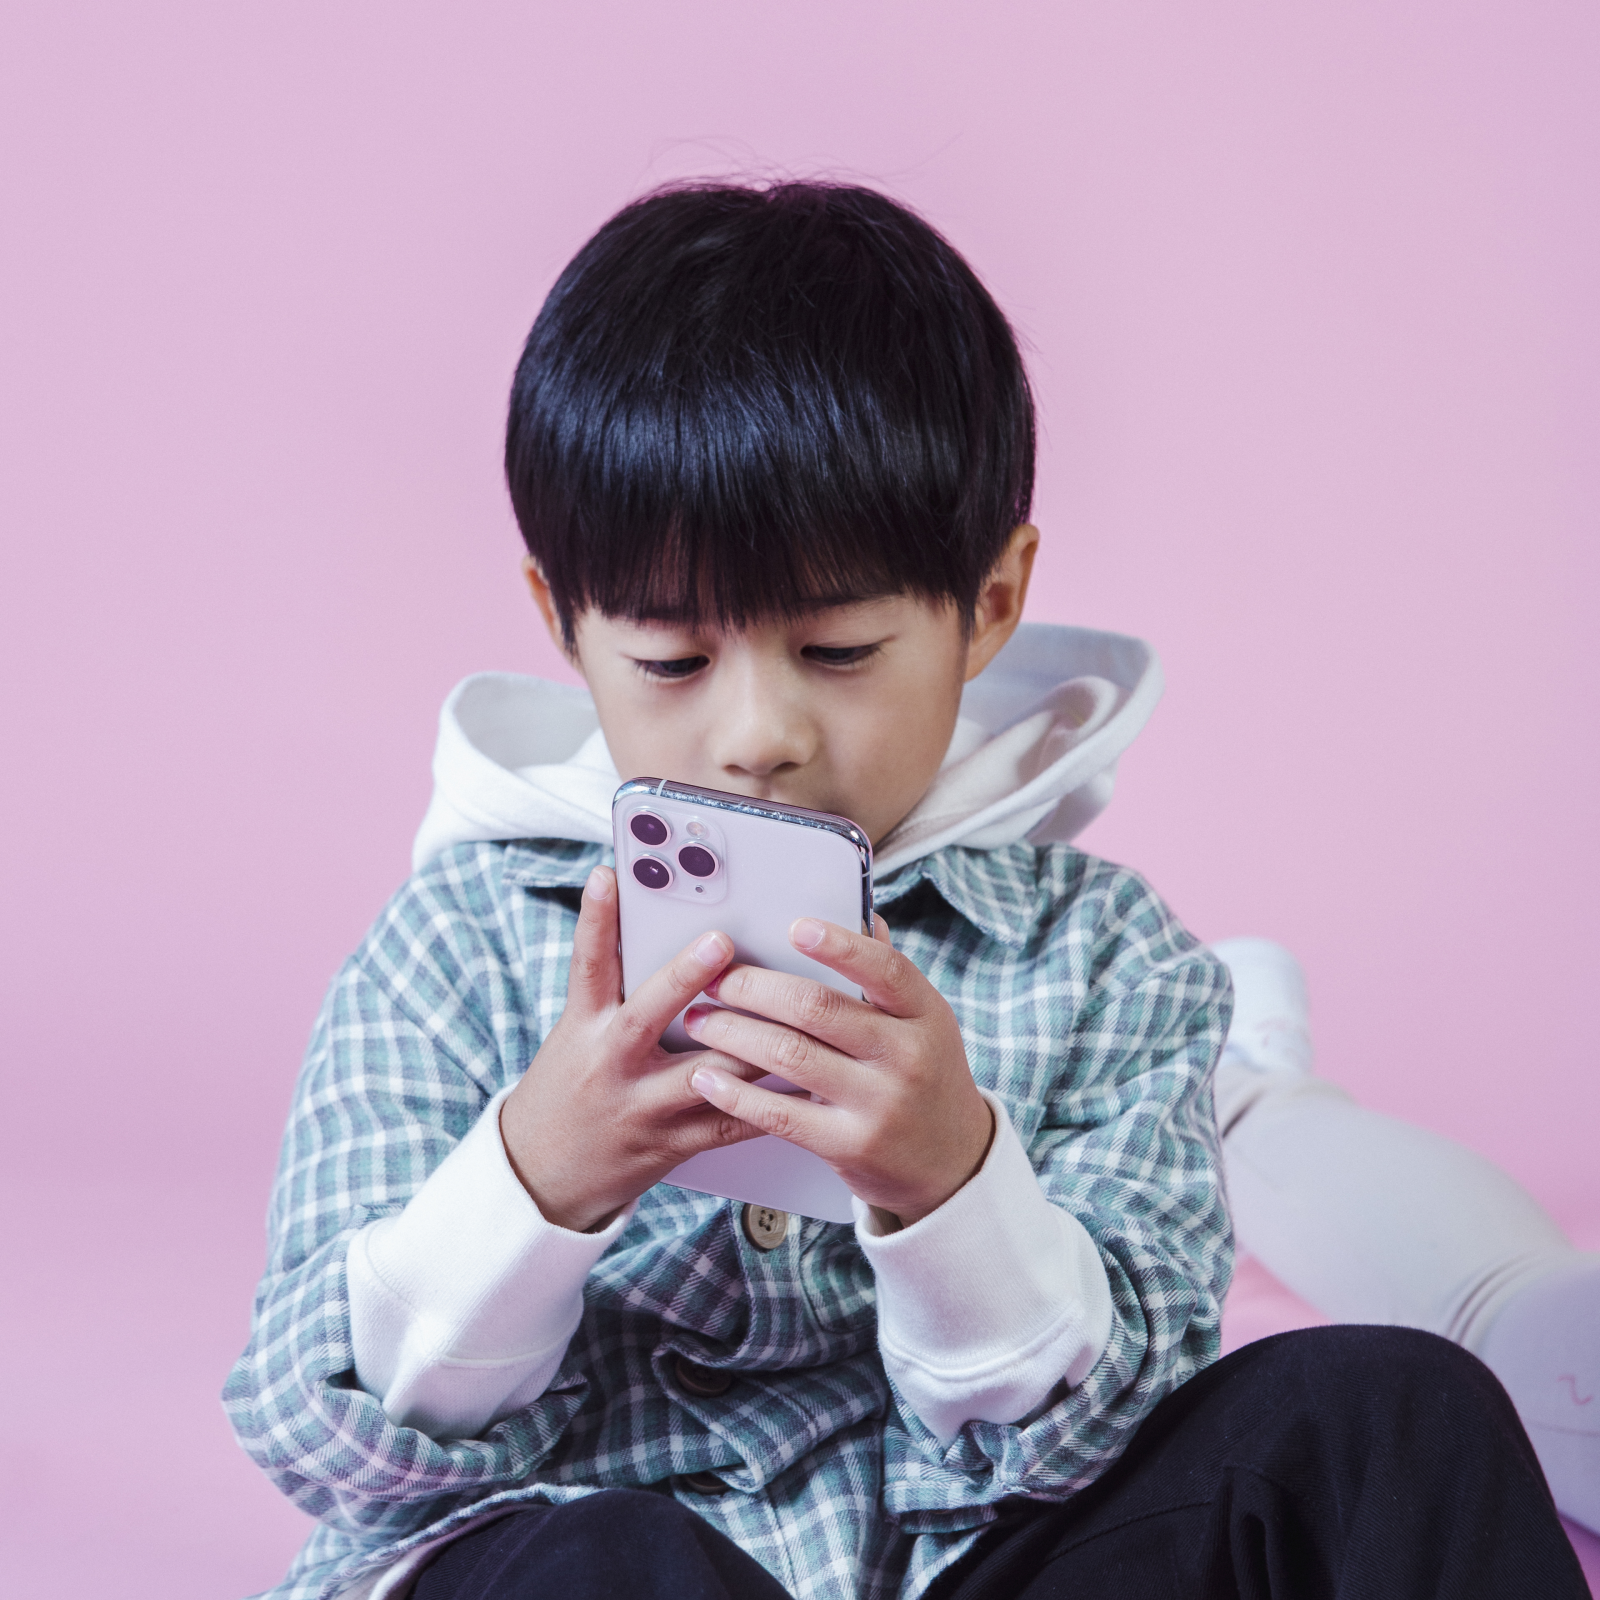 Child immersed in smartphone.